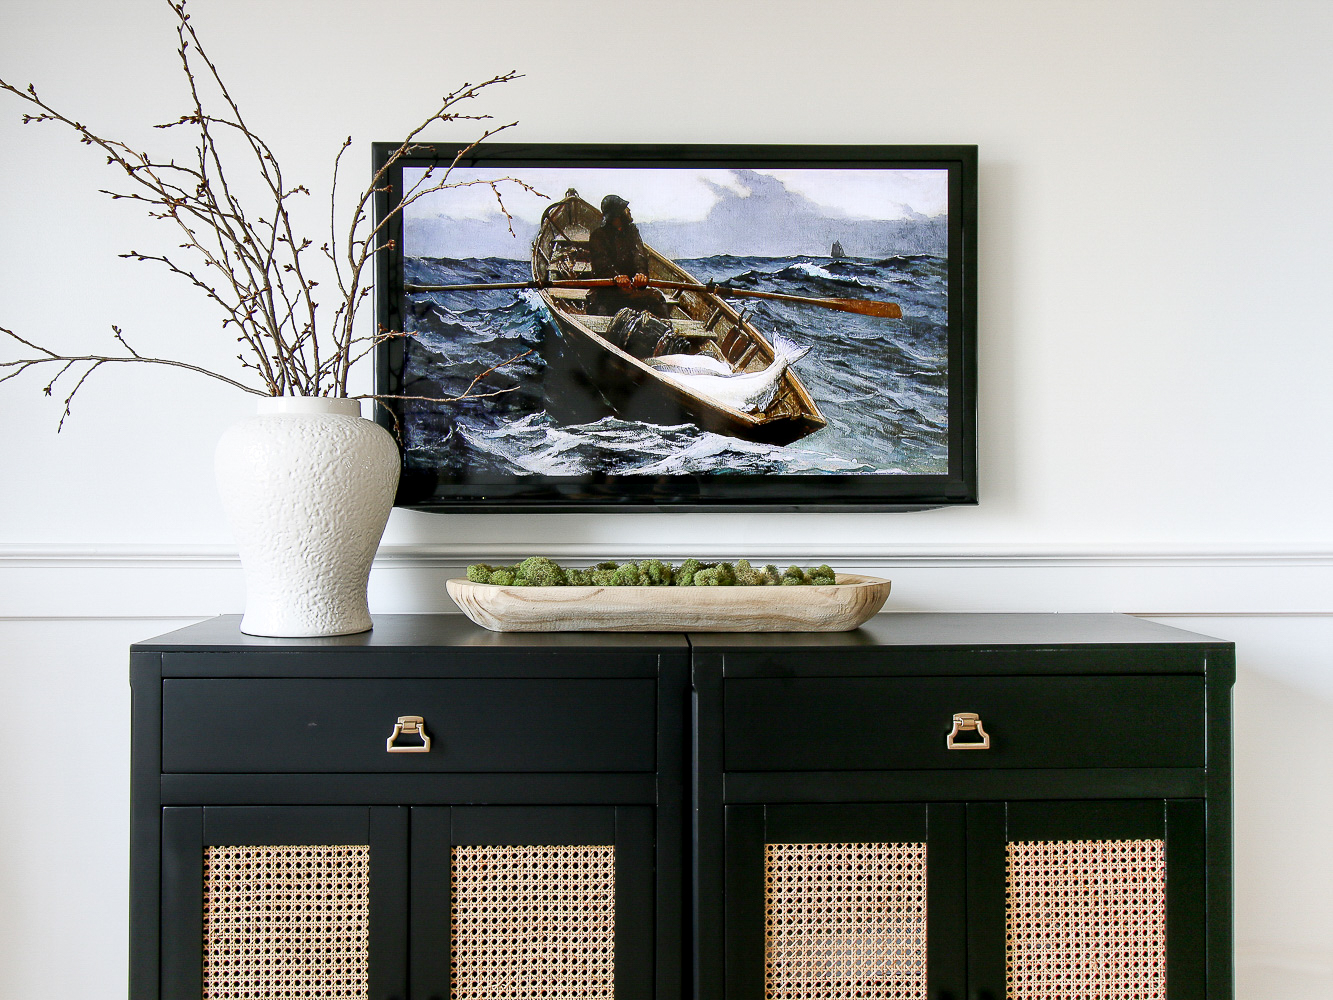 How to Hide TV Wires in Your Wall - Stefana Silber